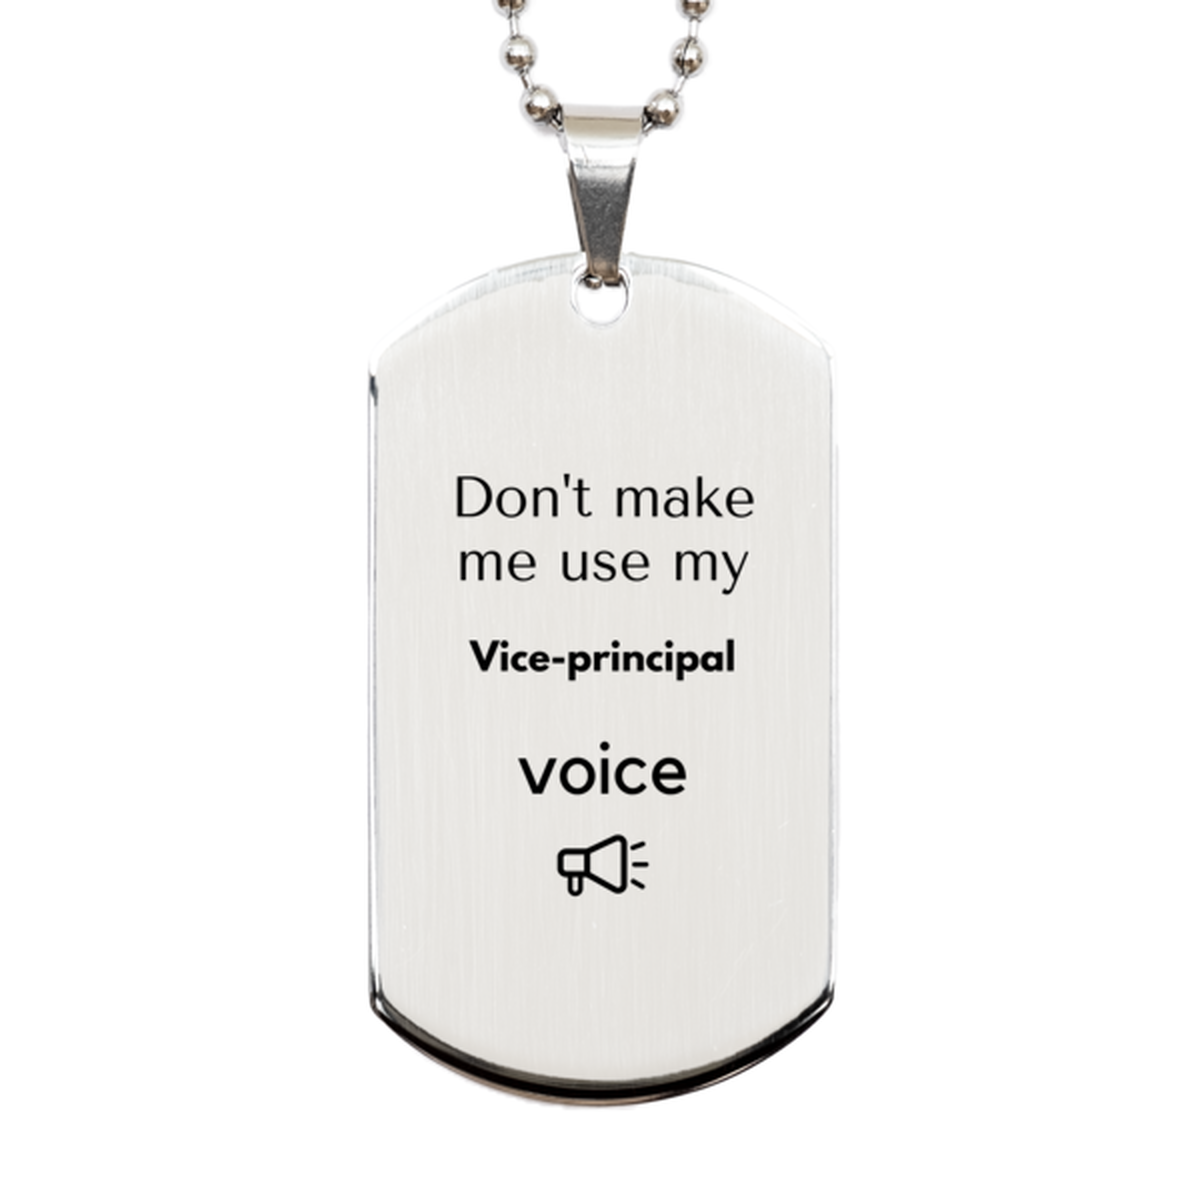 Don't make me use my Vice-principal voice, Sarcasm Vice-principal Gifts, Christmas Vice-principal Silver Dog Tag Birthday Unique Gifts For Vice-principal Coworkers, Men, Women, Colleague, Friends